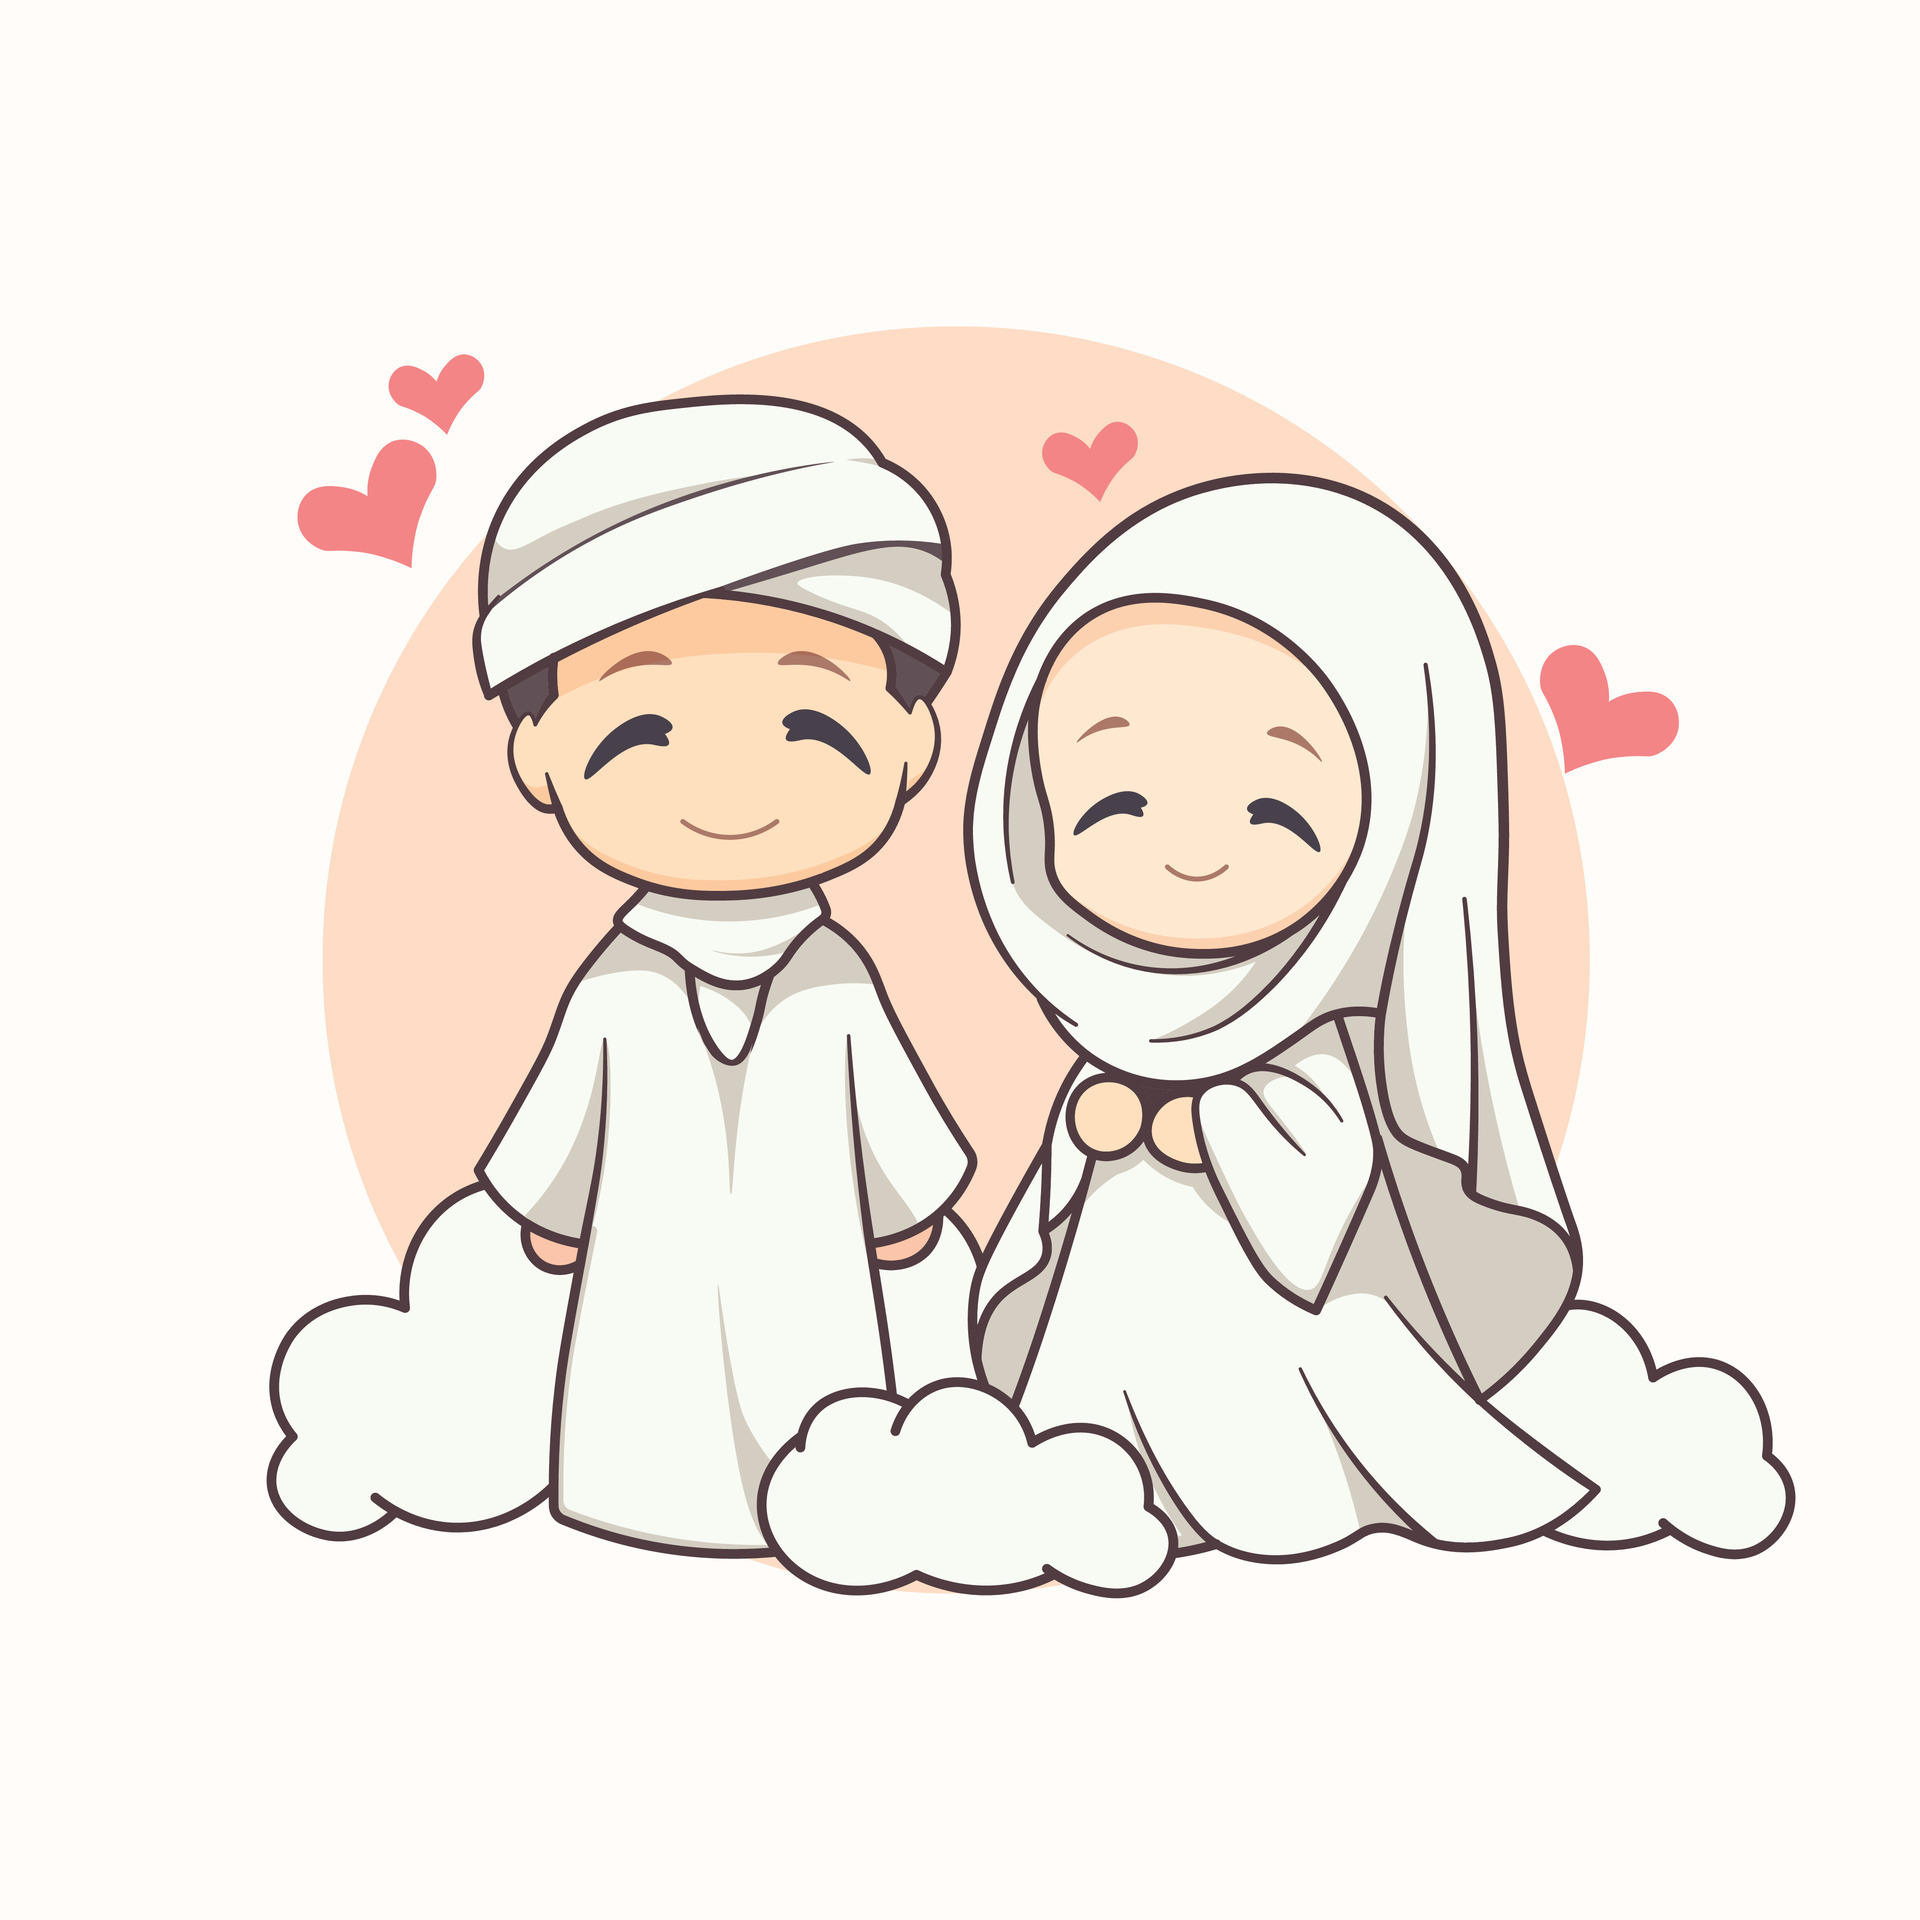 Wallpaper Illustration Of A Muslim Couple Who Love Each Other With Pastel  Green Background Wallpaper Image For Free Download - Pngtree